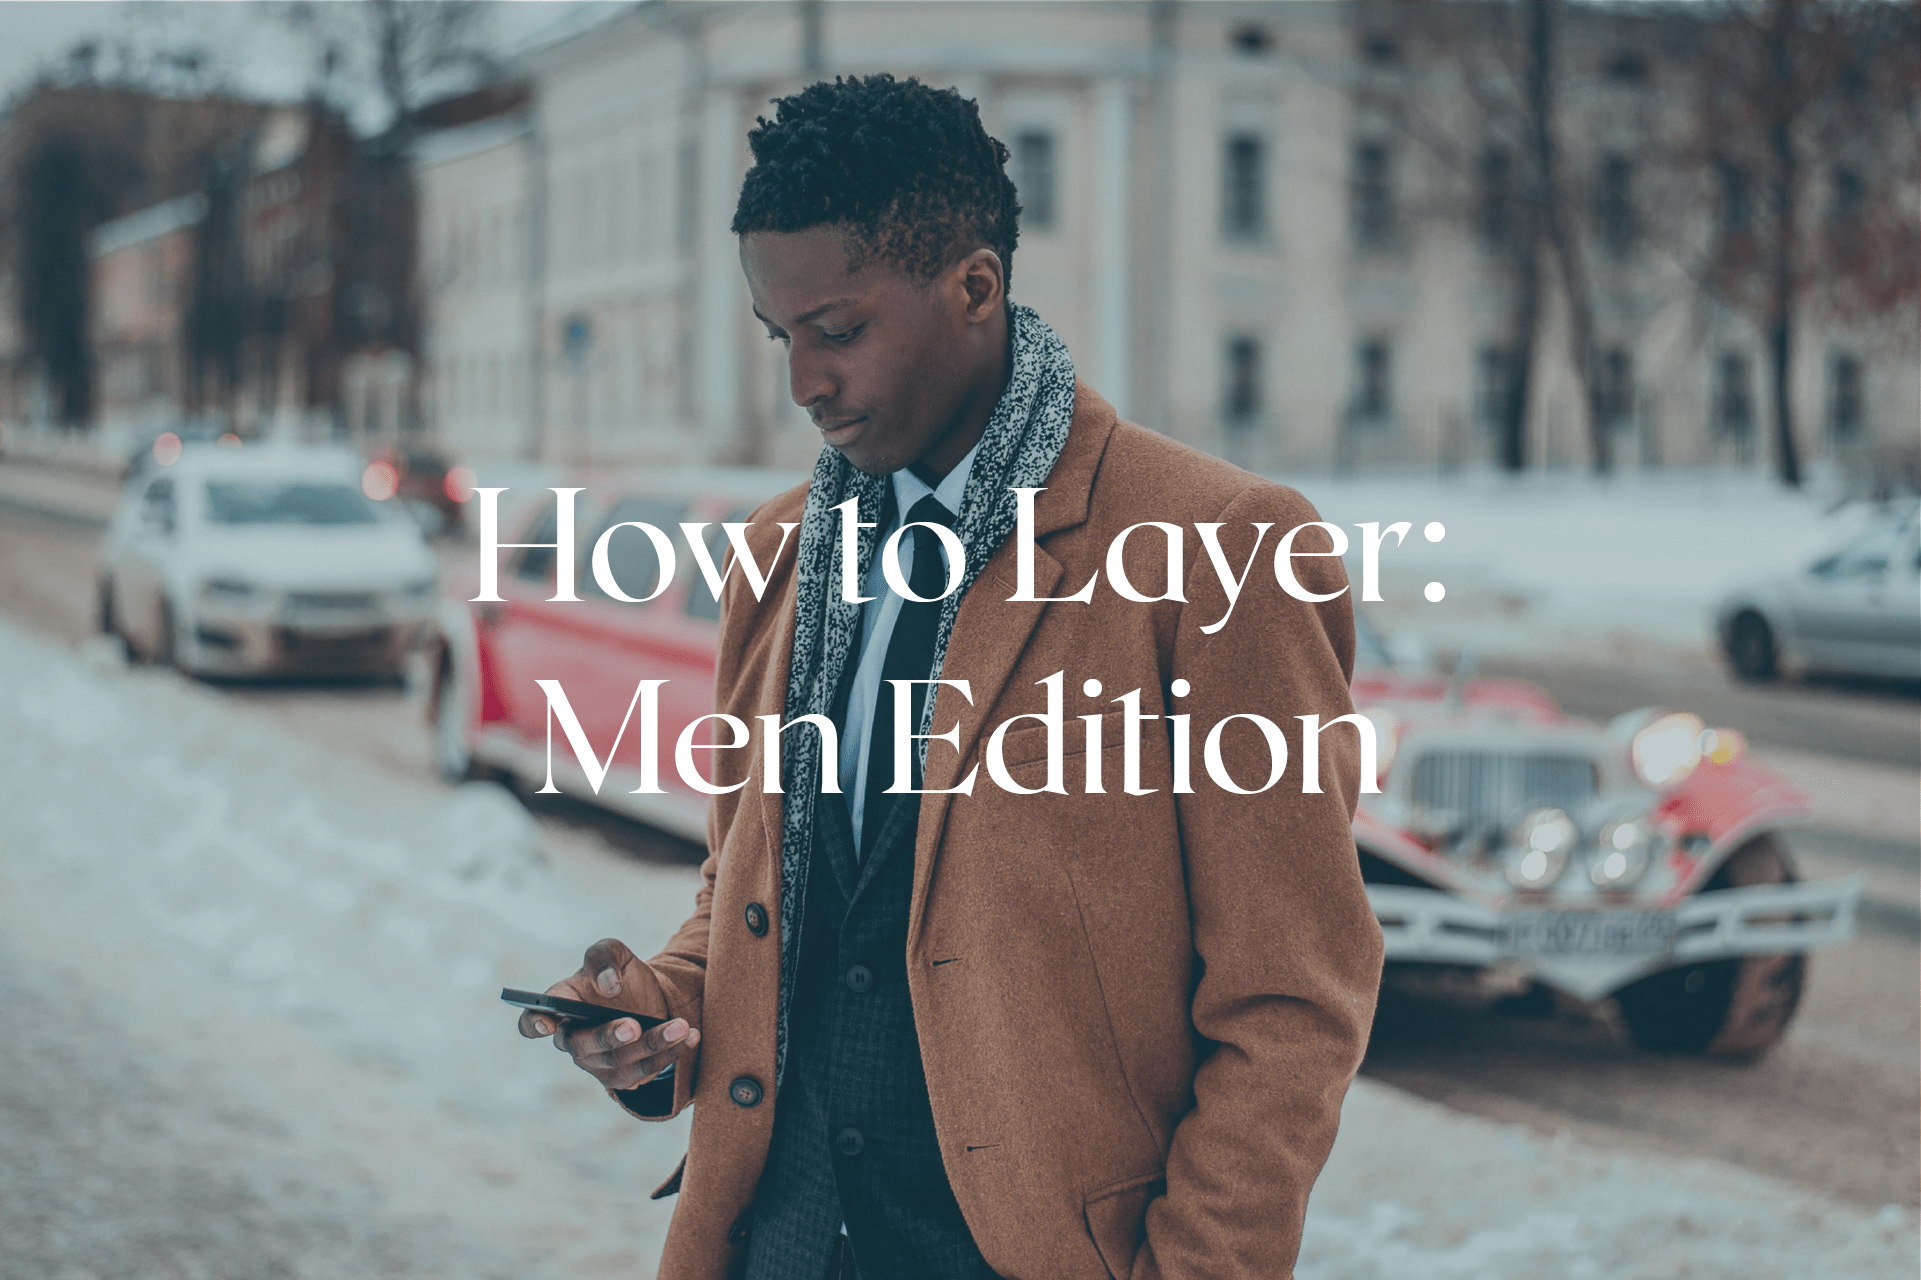 How to layer: Men Edition